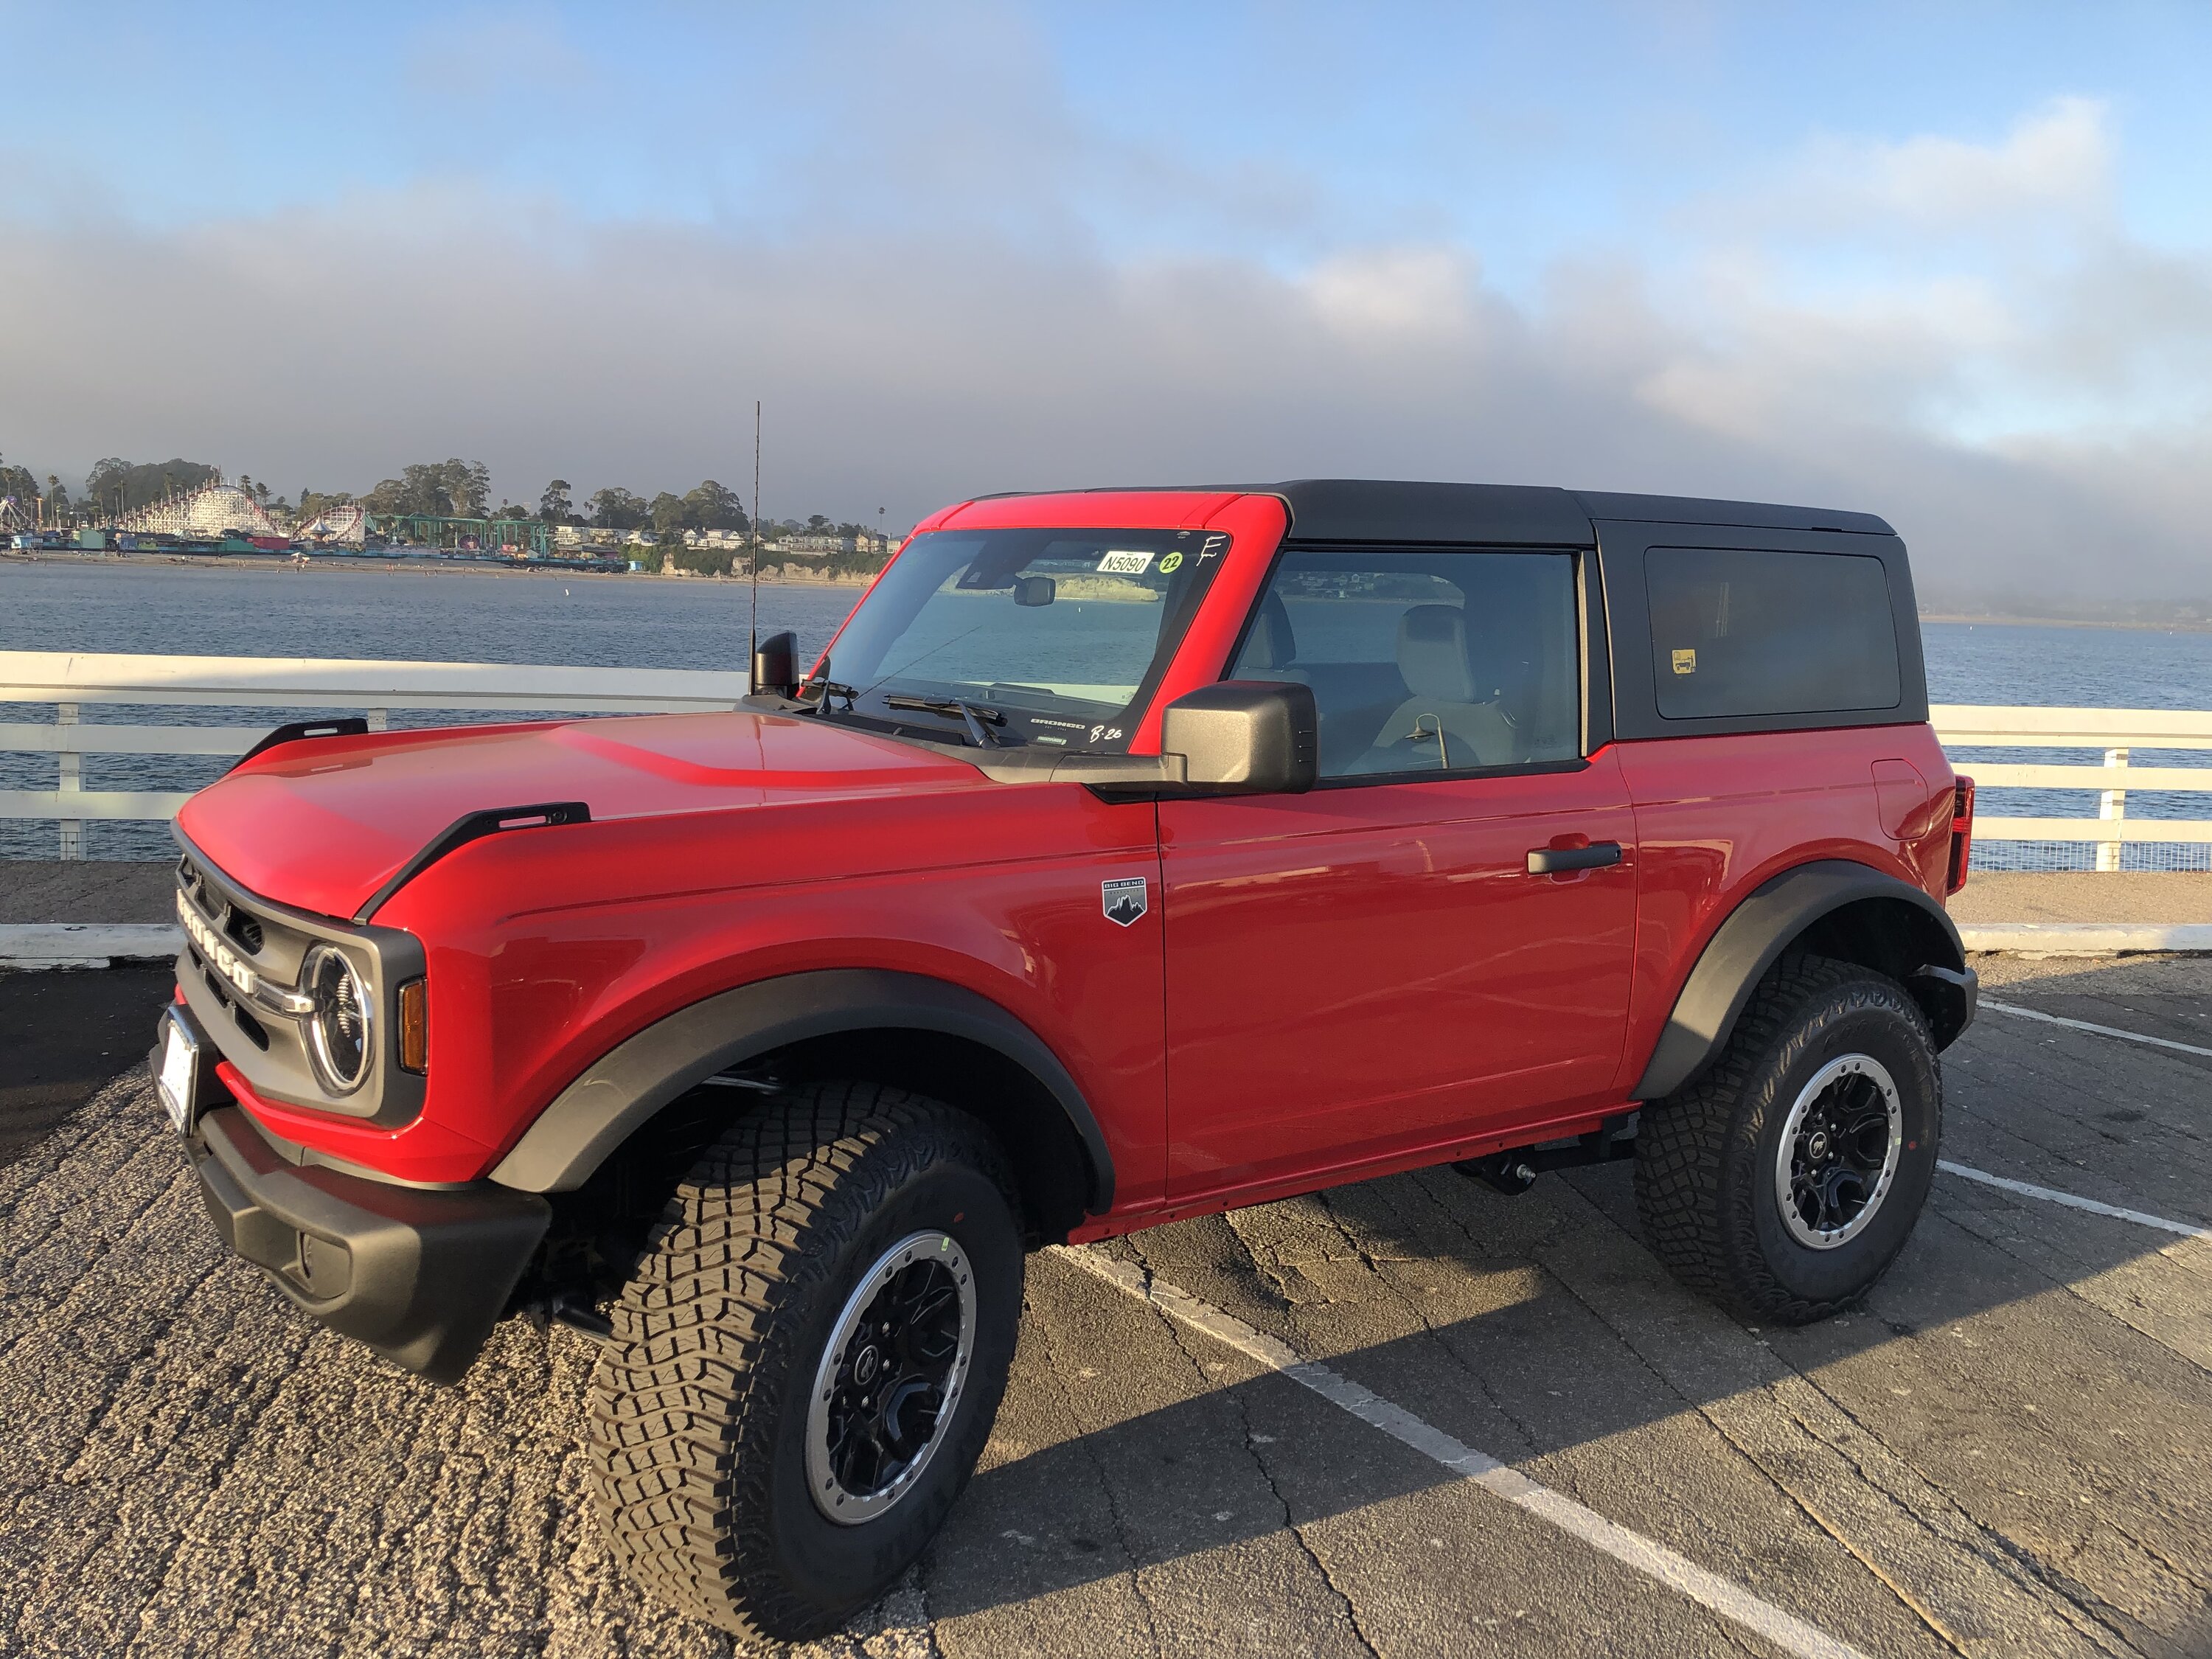 Ford Bronco RACE RED Bronco Club ACFDF620-669B-4D76-BE3A-AD725FAA2ADF